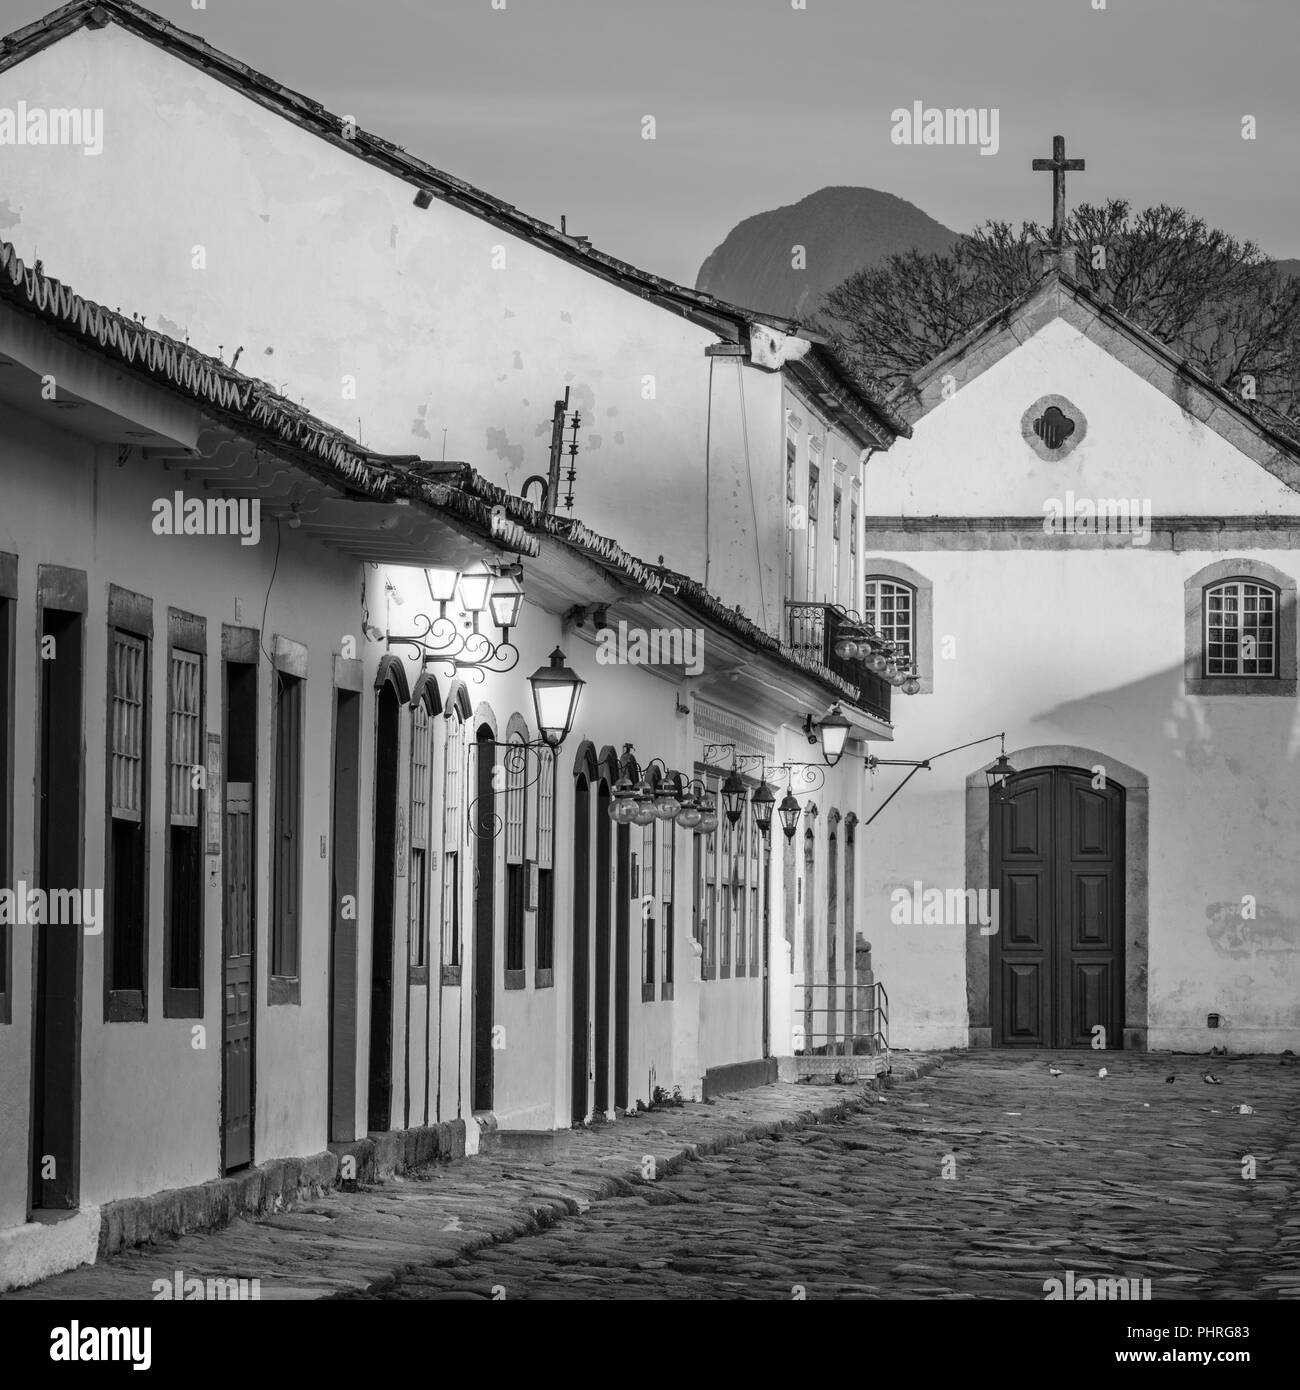 Nossa Senhora do Rosário Church is located in Paraty, one of the first cities in Brazil where the portuguese left their finger prints in the archtectu Stock Photo